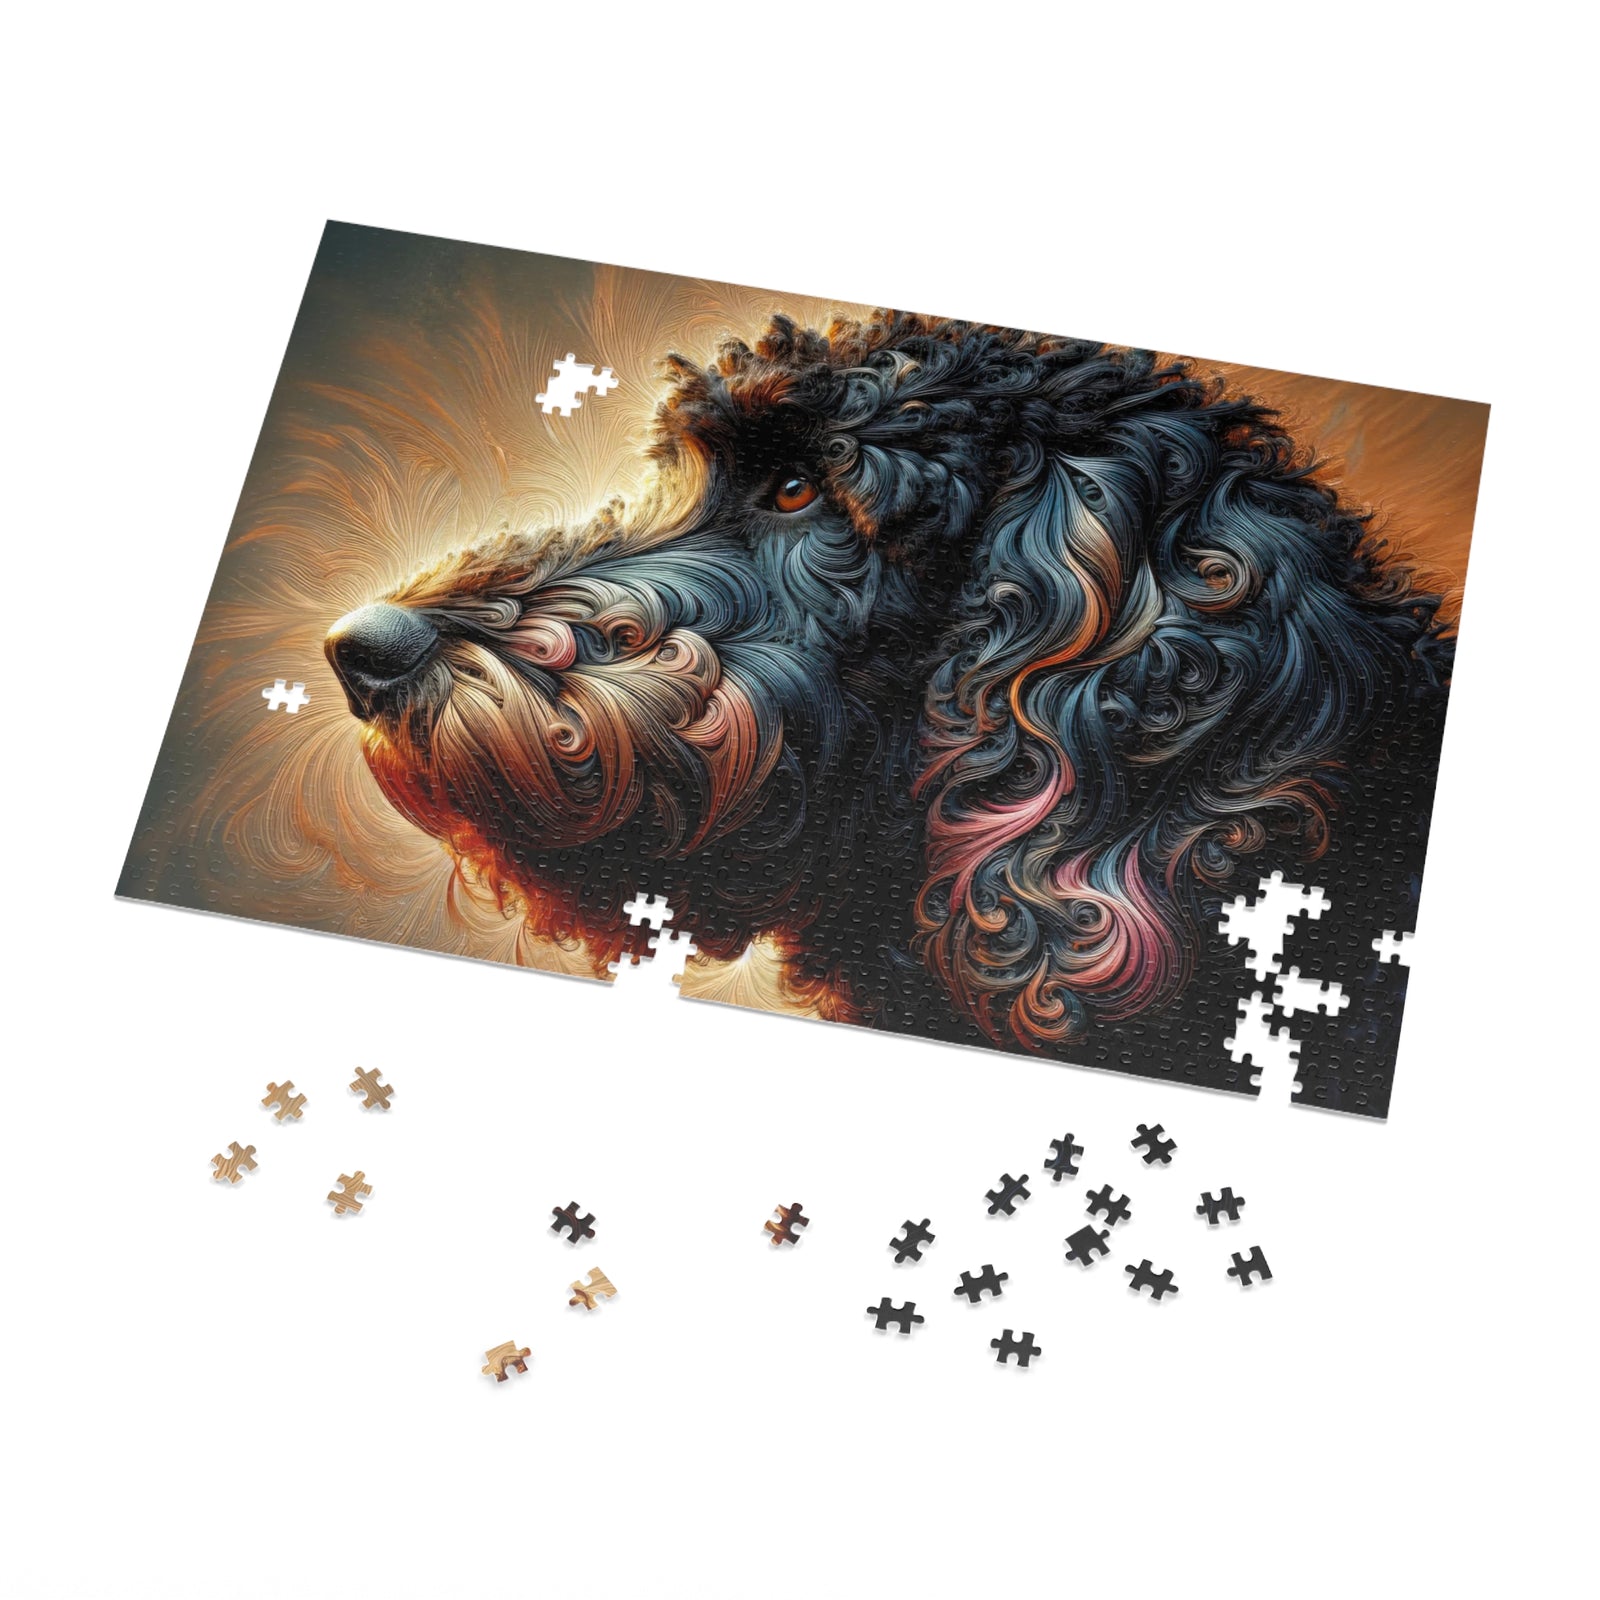 Opal's Whorled Whimsy Jigsaw Puzzle